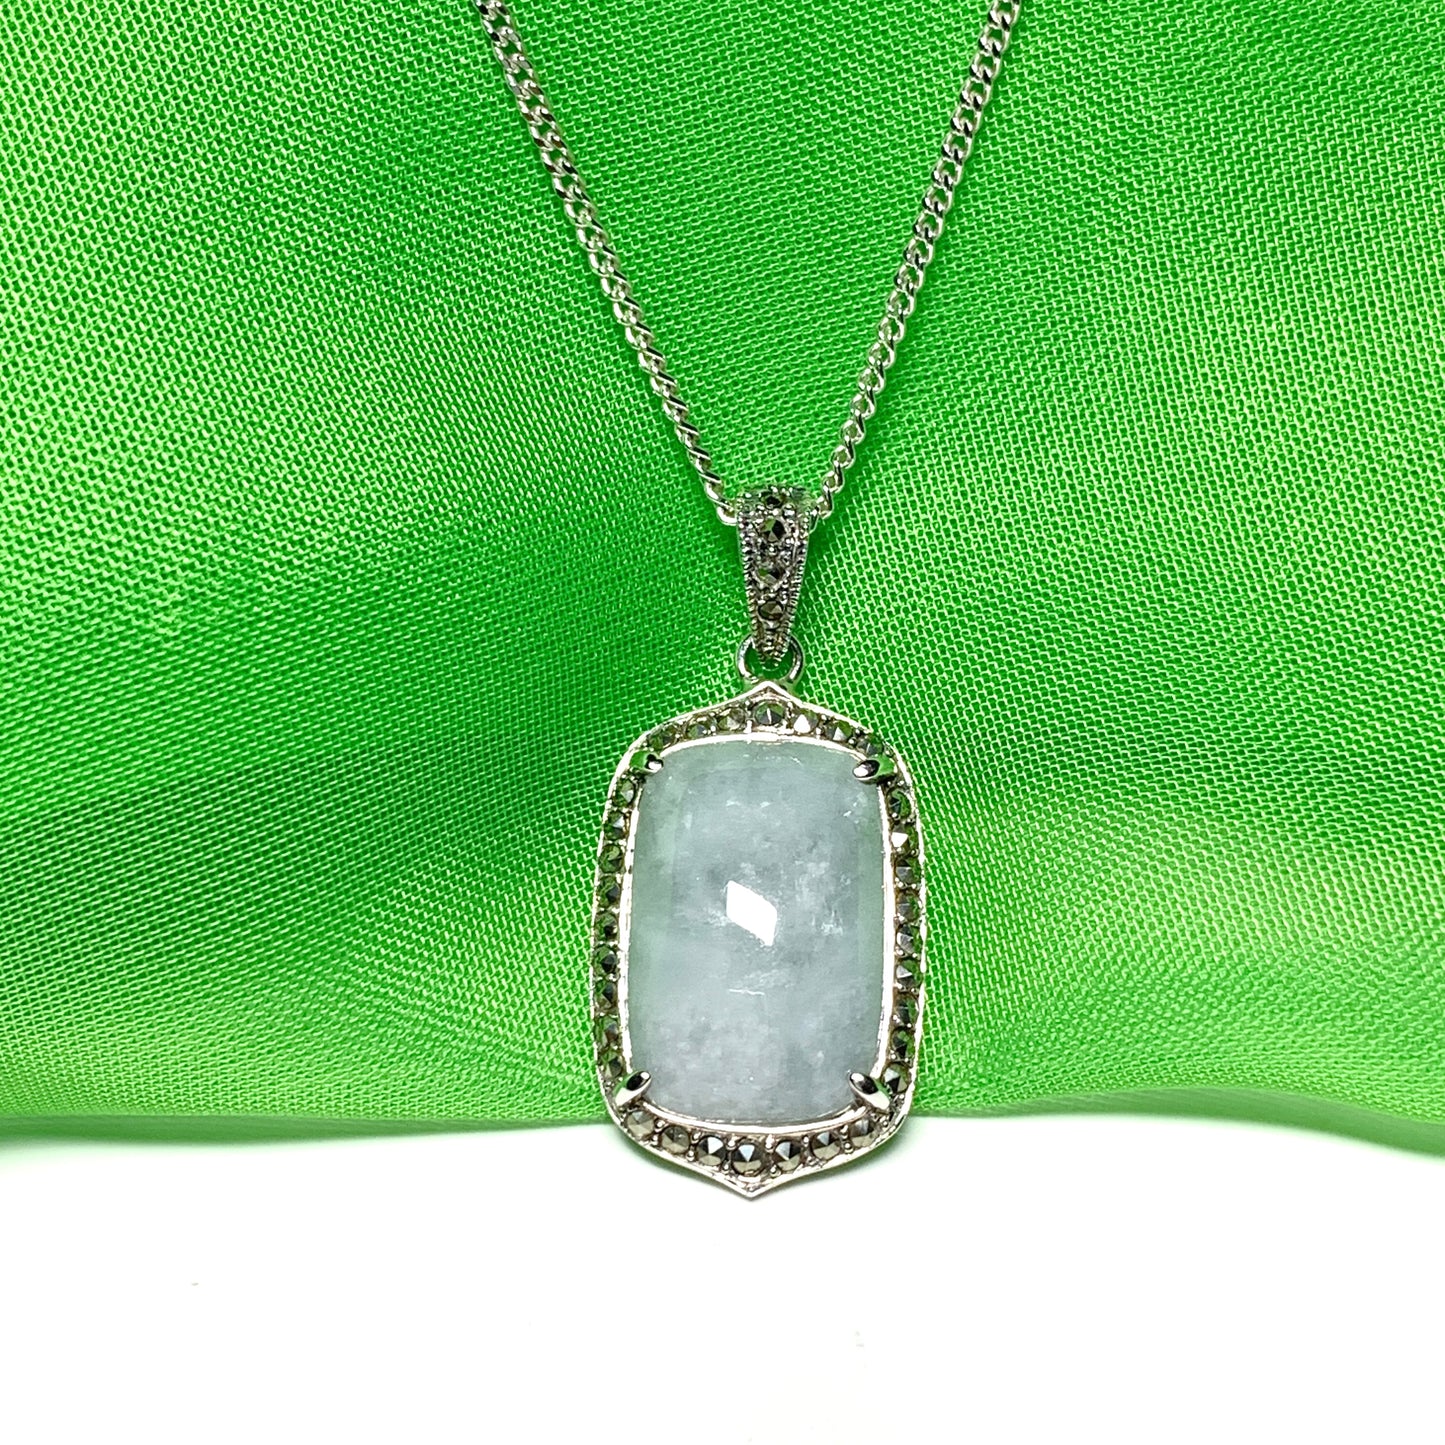 Long cushion shaped silver light green jade and marcasite necklace pendant